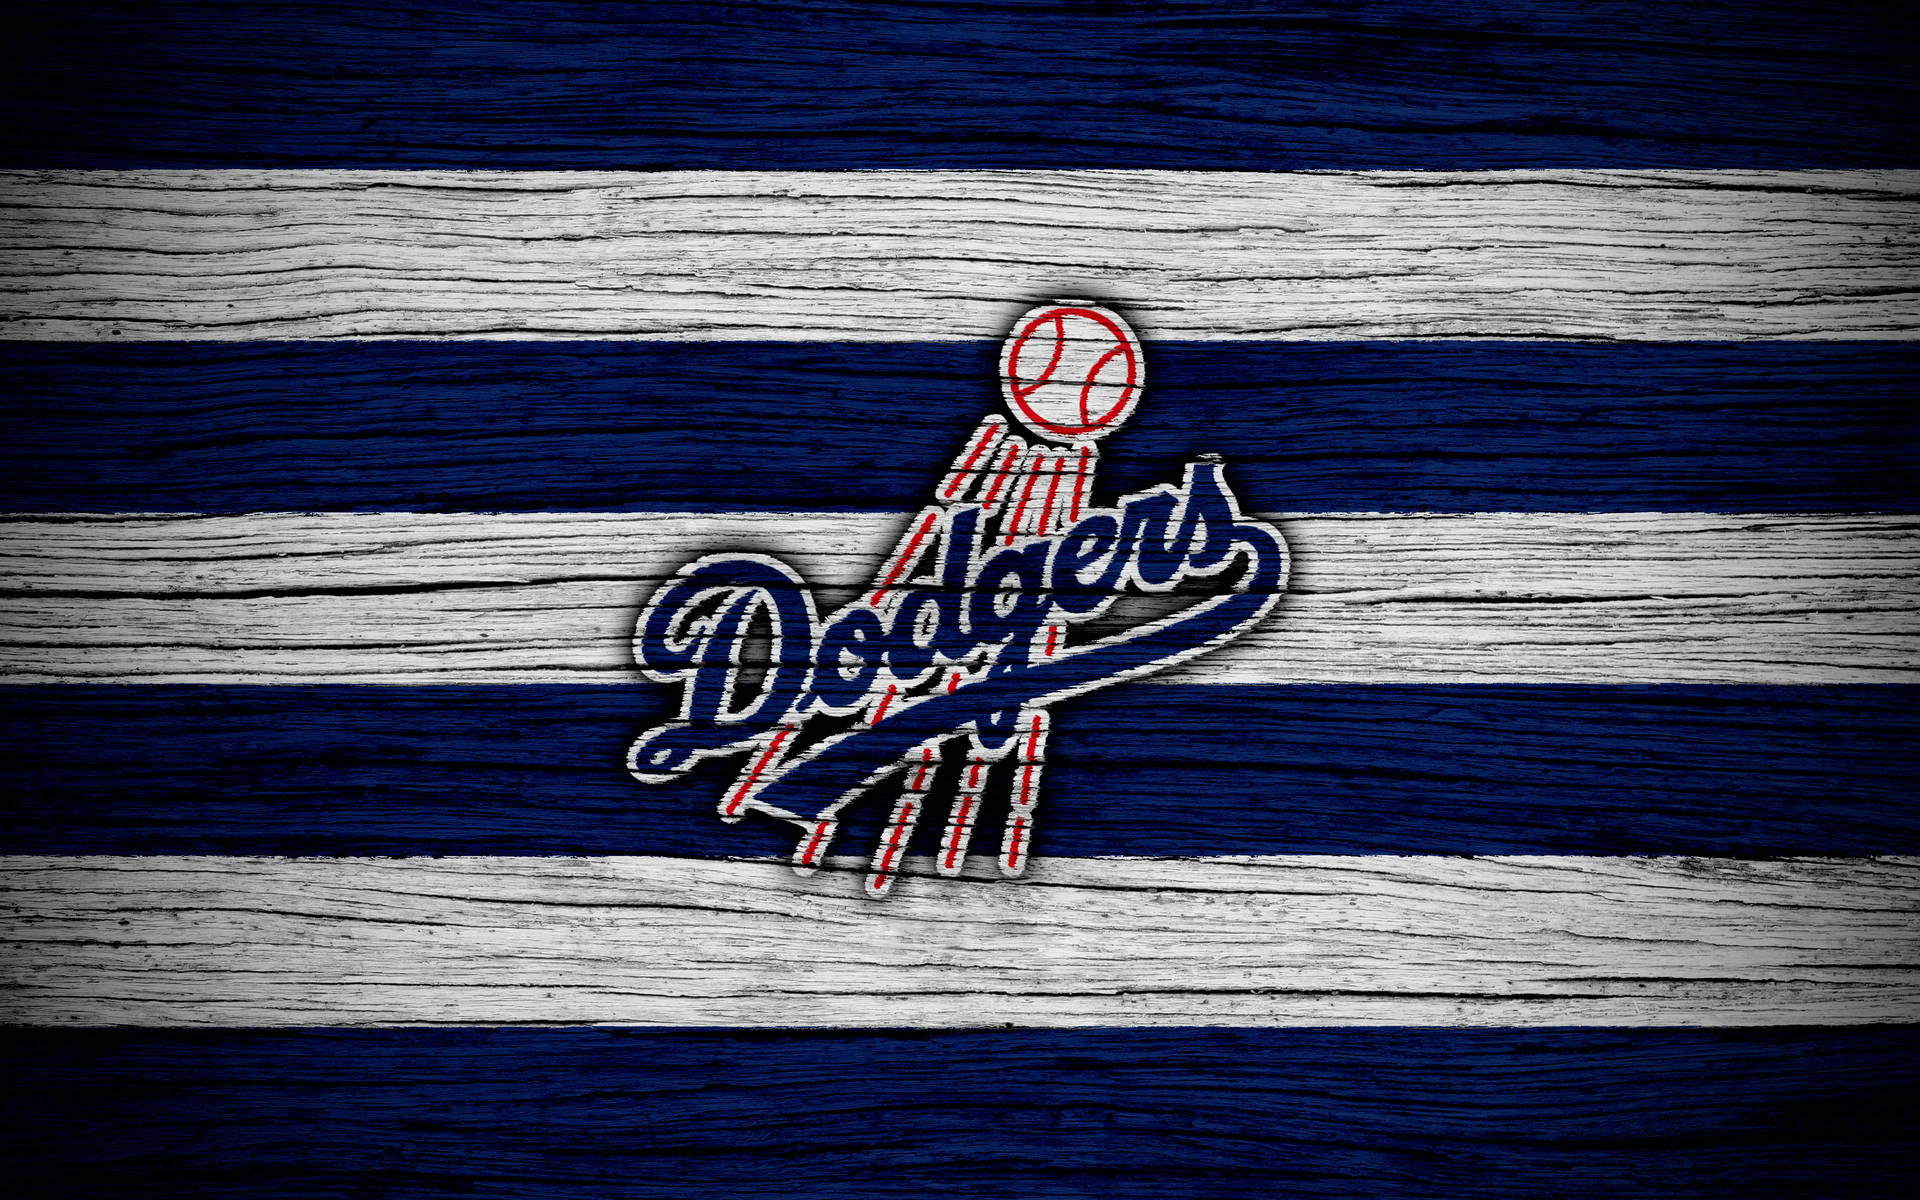 los angeles dodgers wallpapers｜TikTok Search